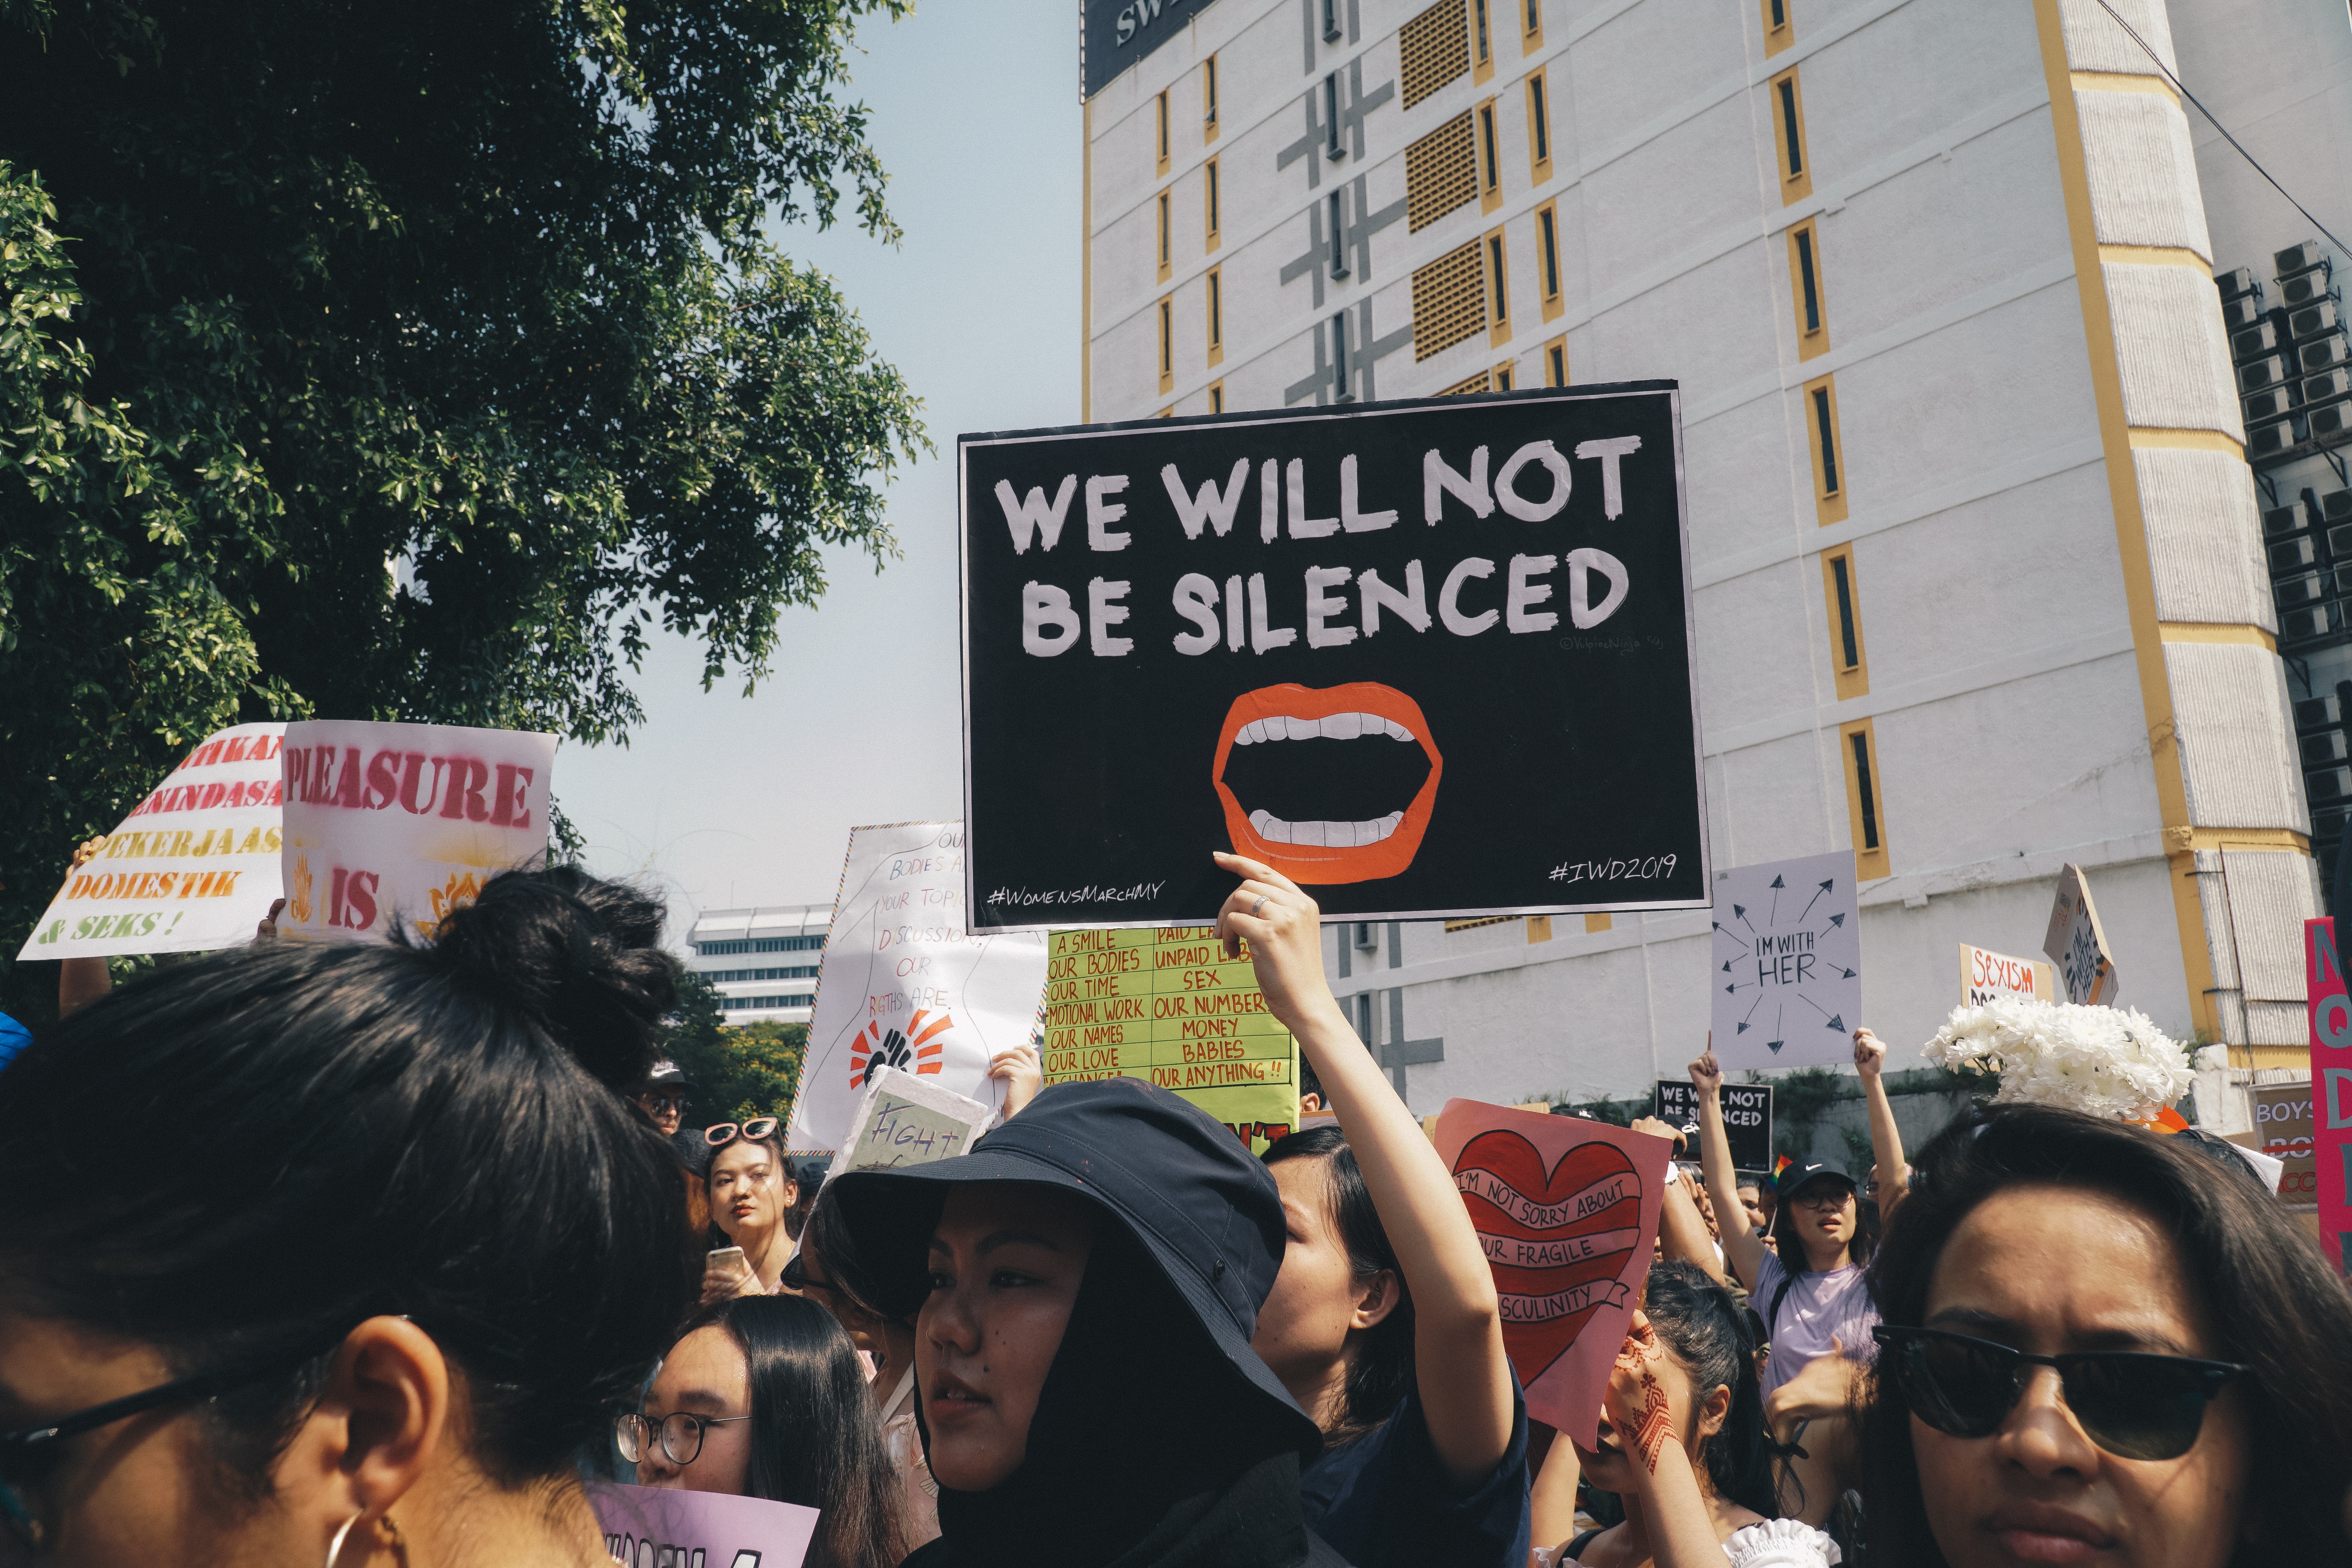 A young woman in a protest holding a placard that says "we will not be silenced."